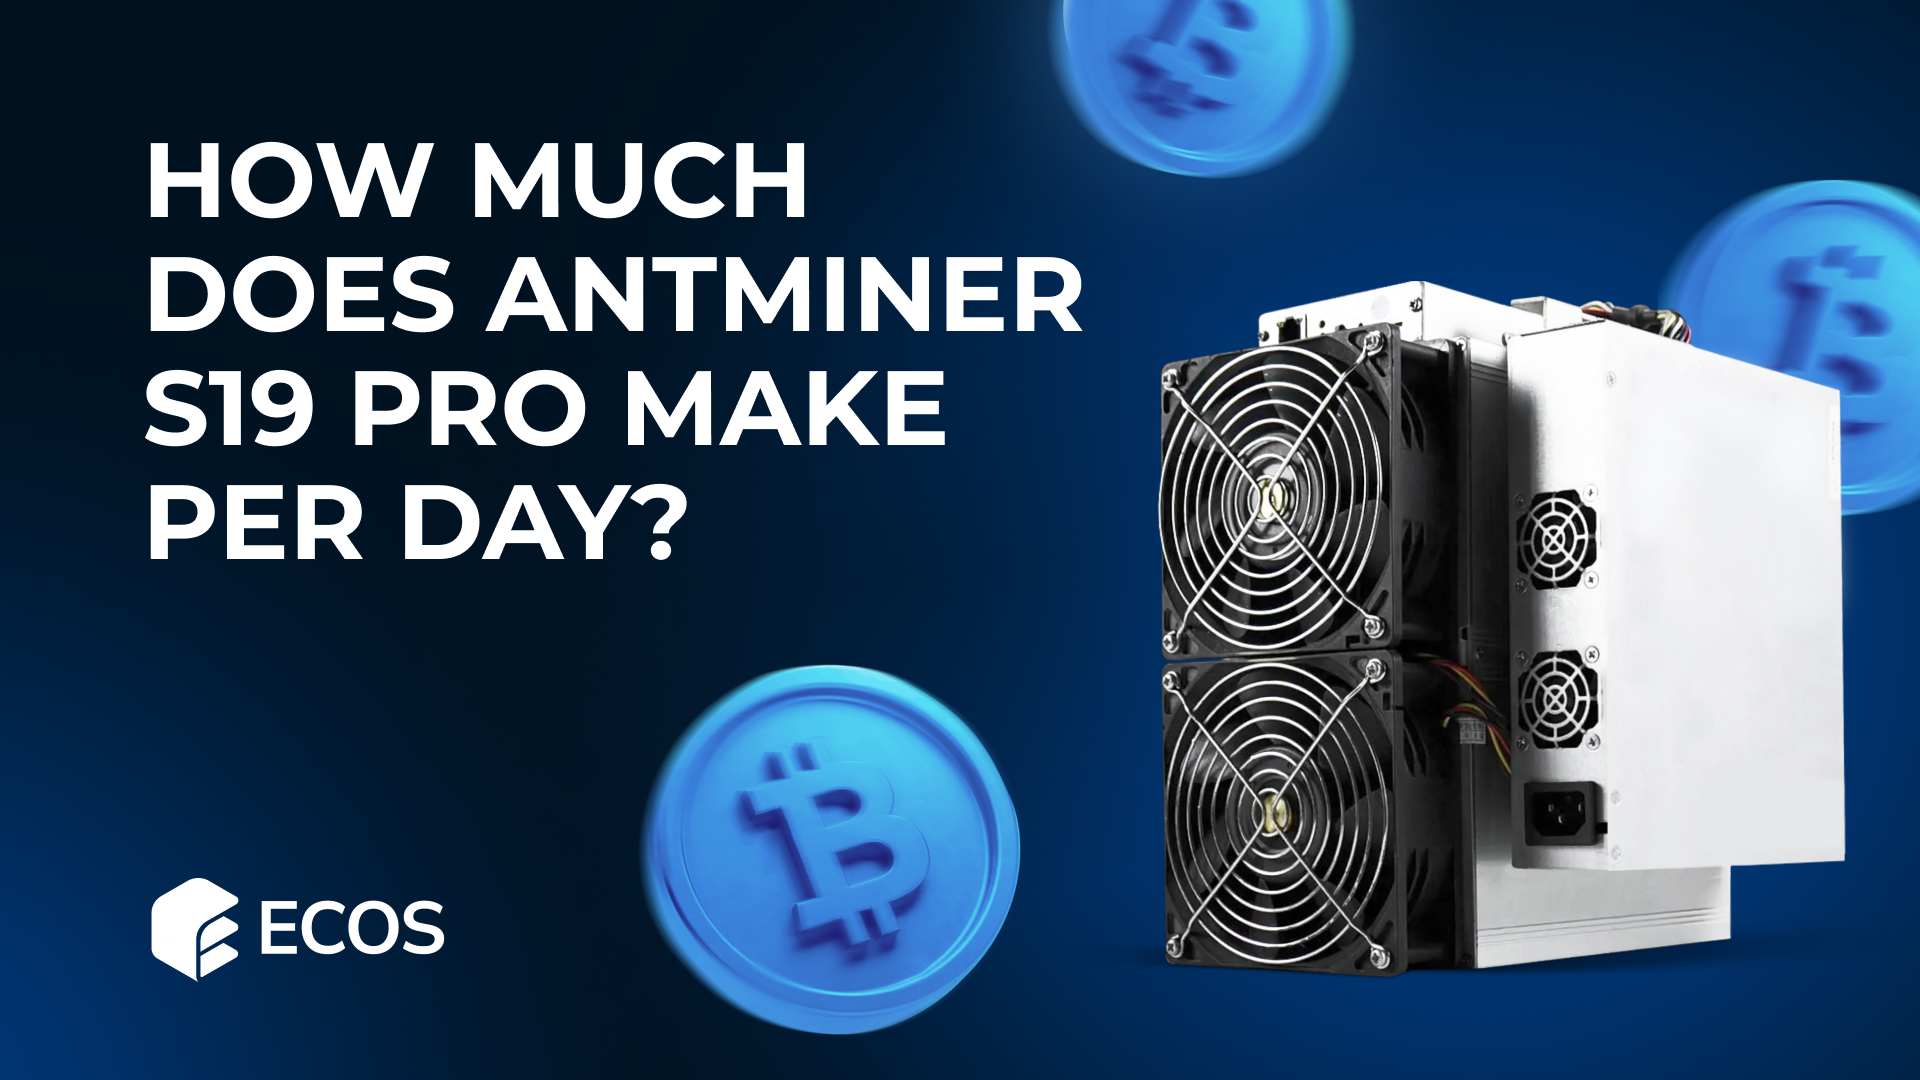 How Much Does Antminer S19 Pro Make Per Day?